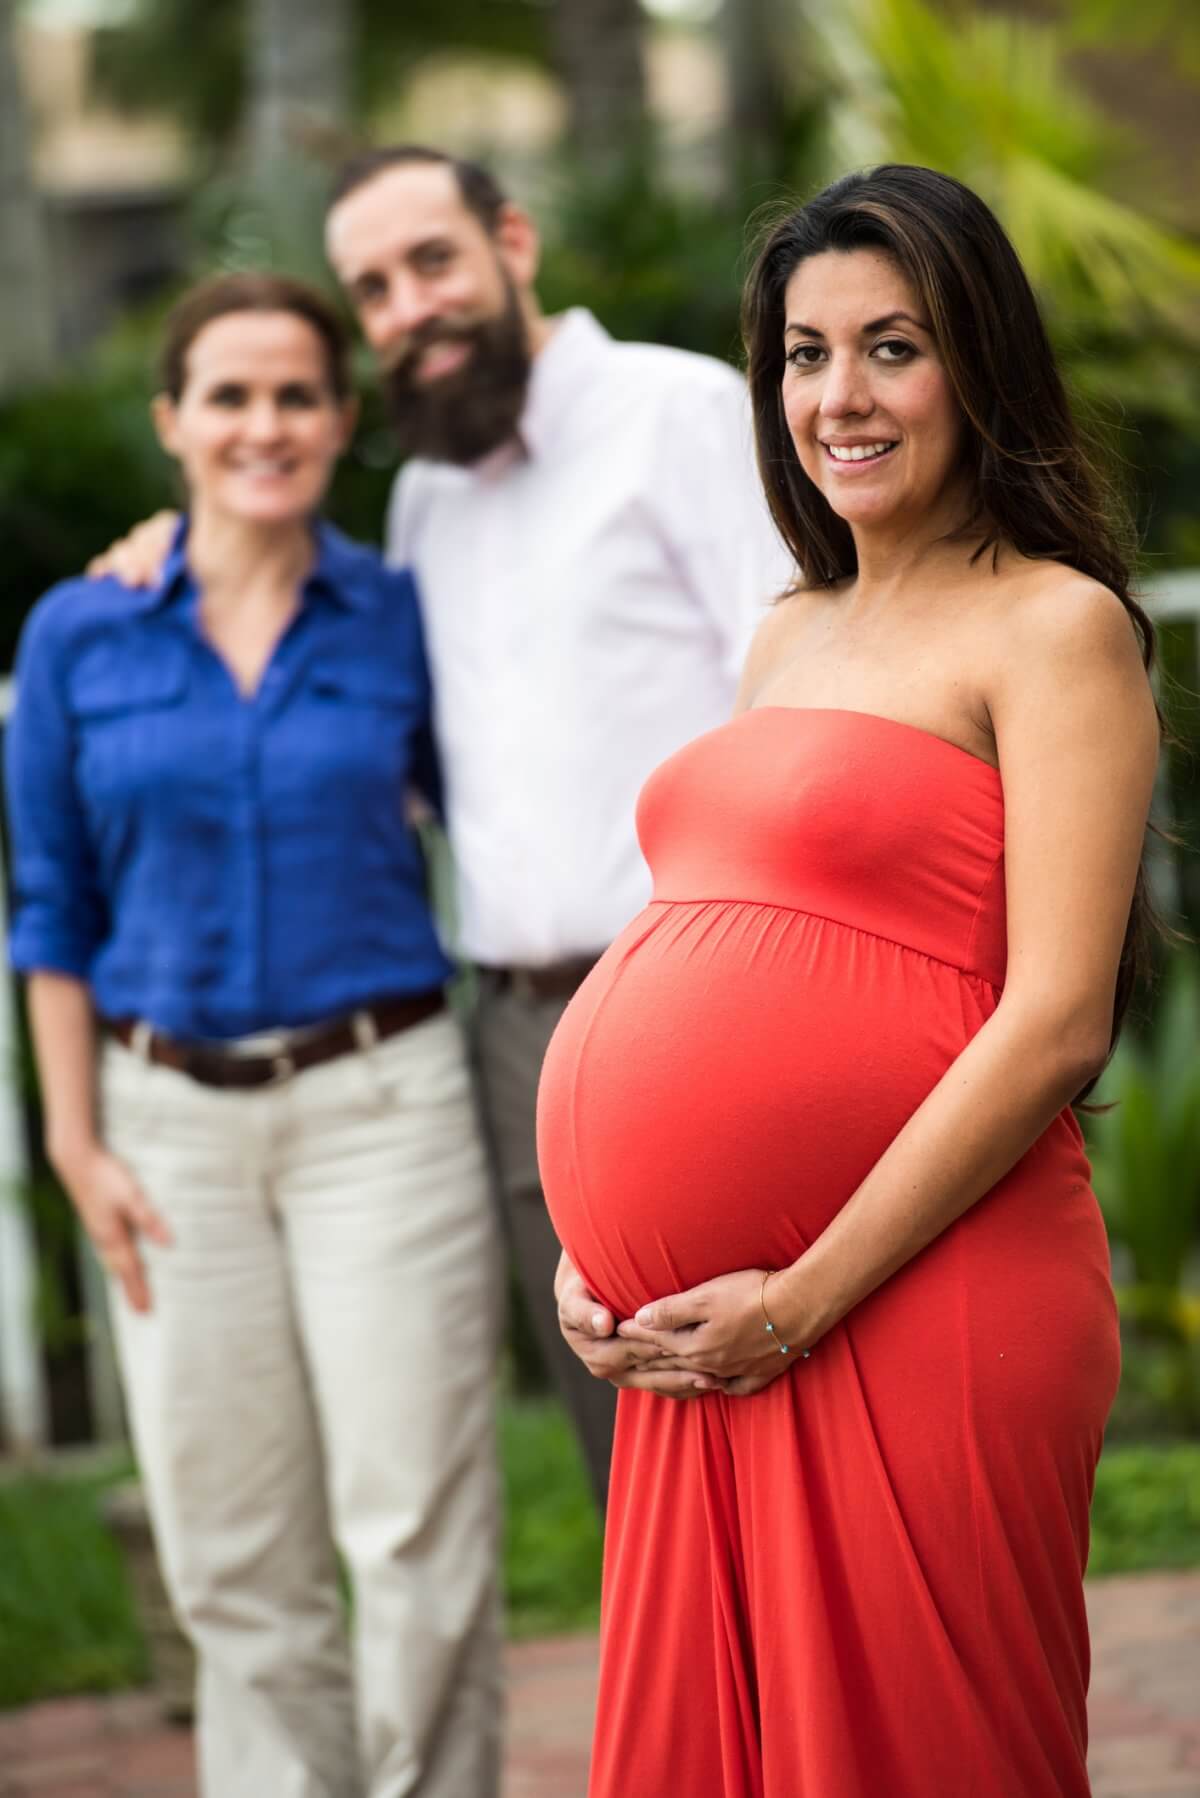 Surrogacy is On the Rise, But Don’t Call it Commercial